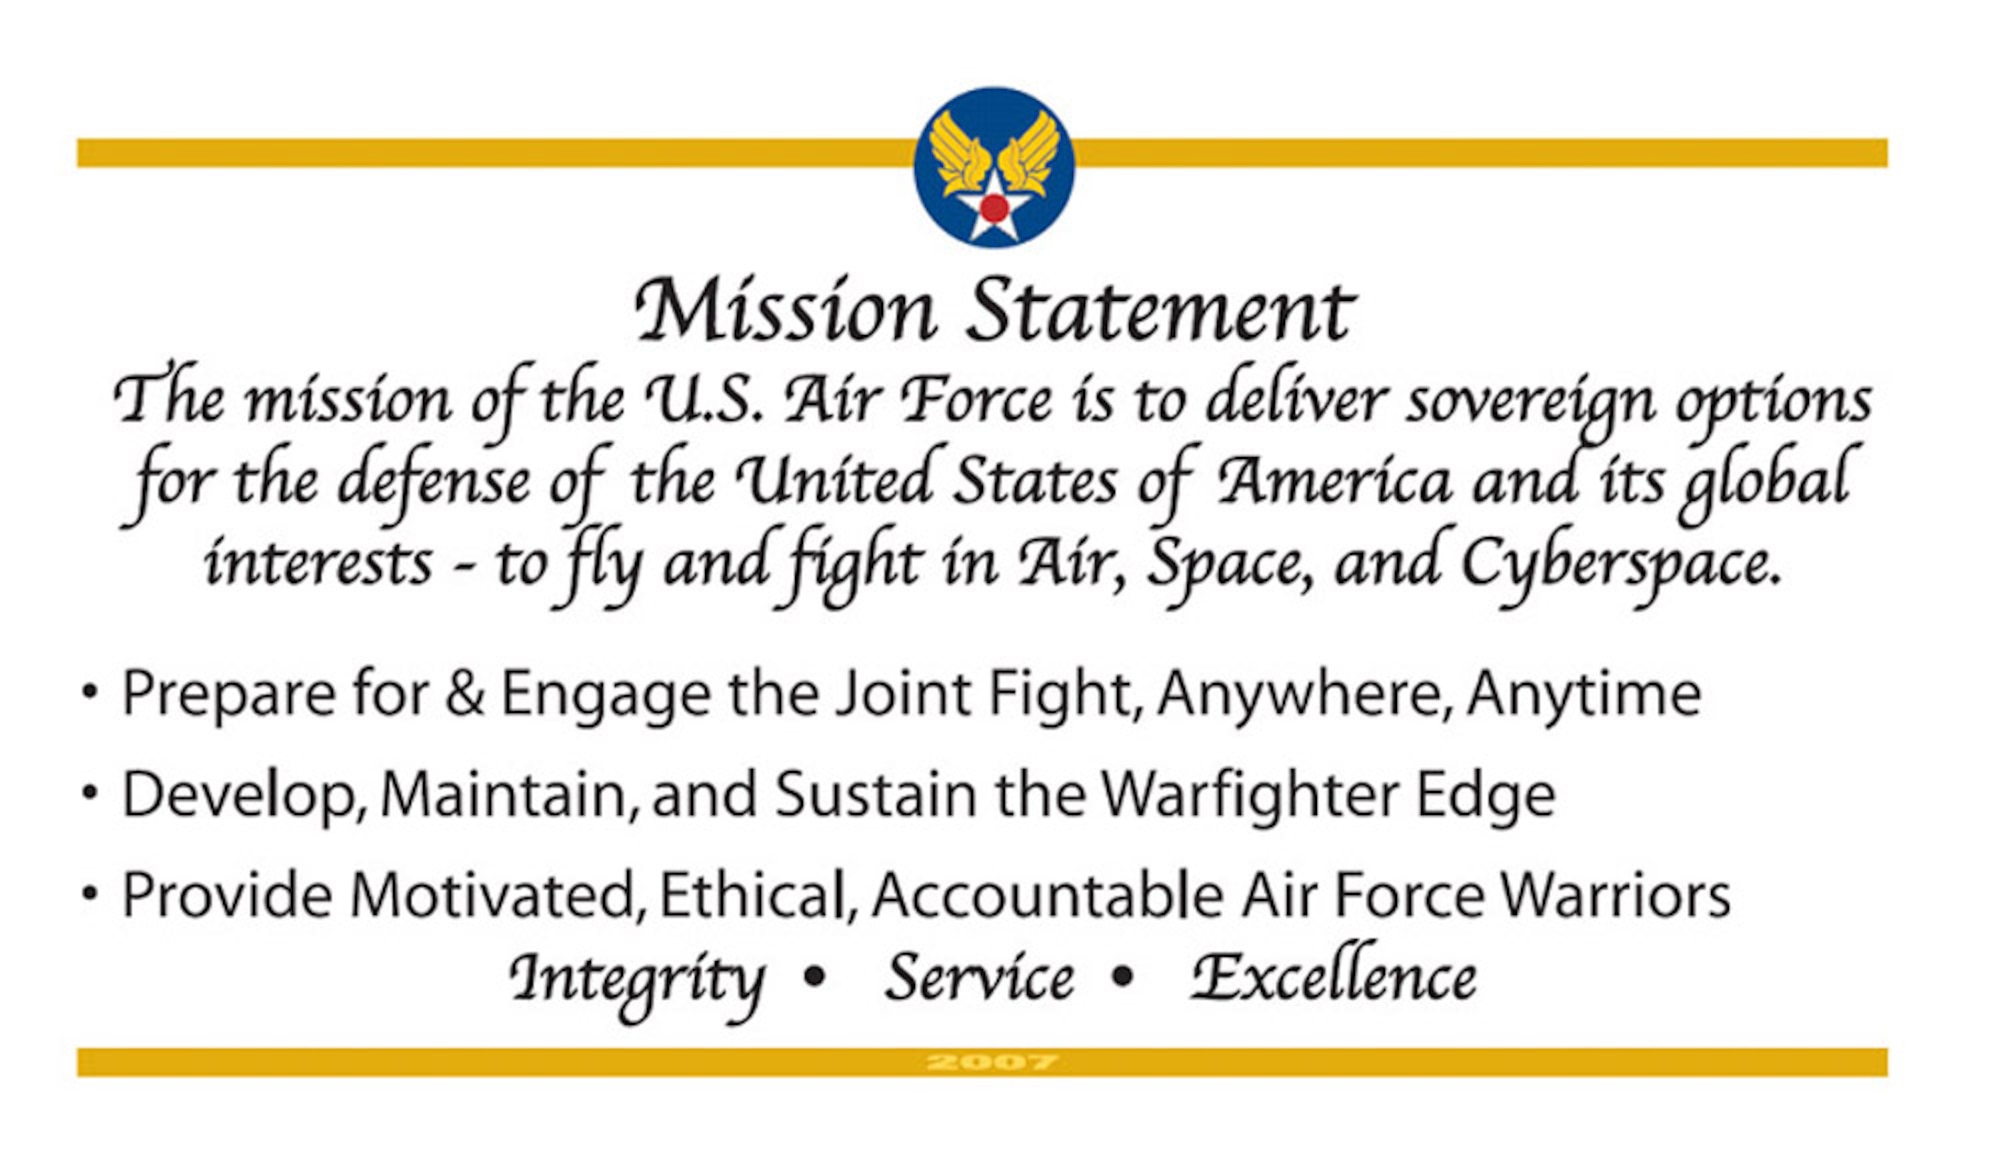 When Secretary of the Air Force Michael W. Wynne spoke at his town hall meeting at the Pentagon earlier this year, he discussed some of the issues facing the Air Force today, as well as its strengths and his goals for 2007. One of the ways he's spreading those goals is through a mission, or "goal card." (U.S. Air Force graphic)